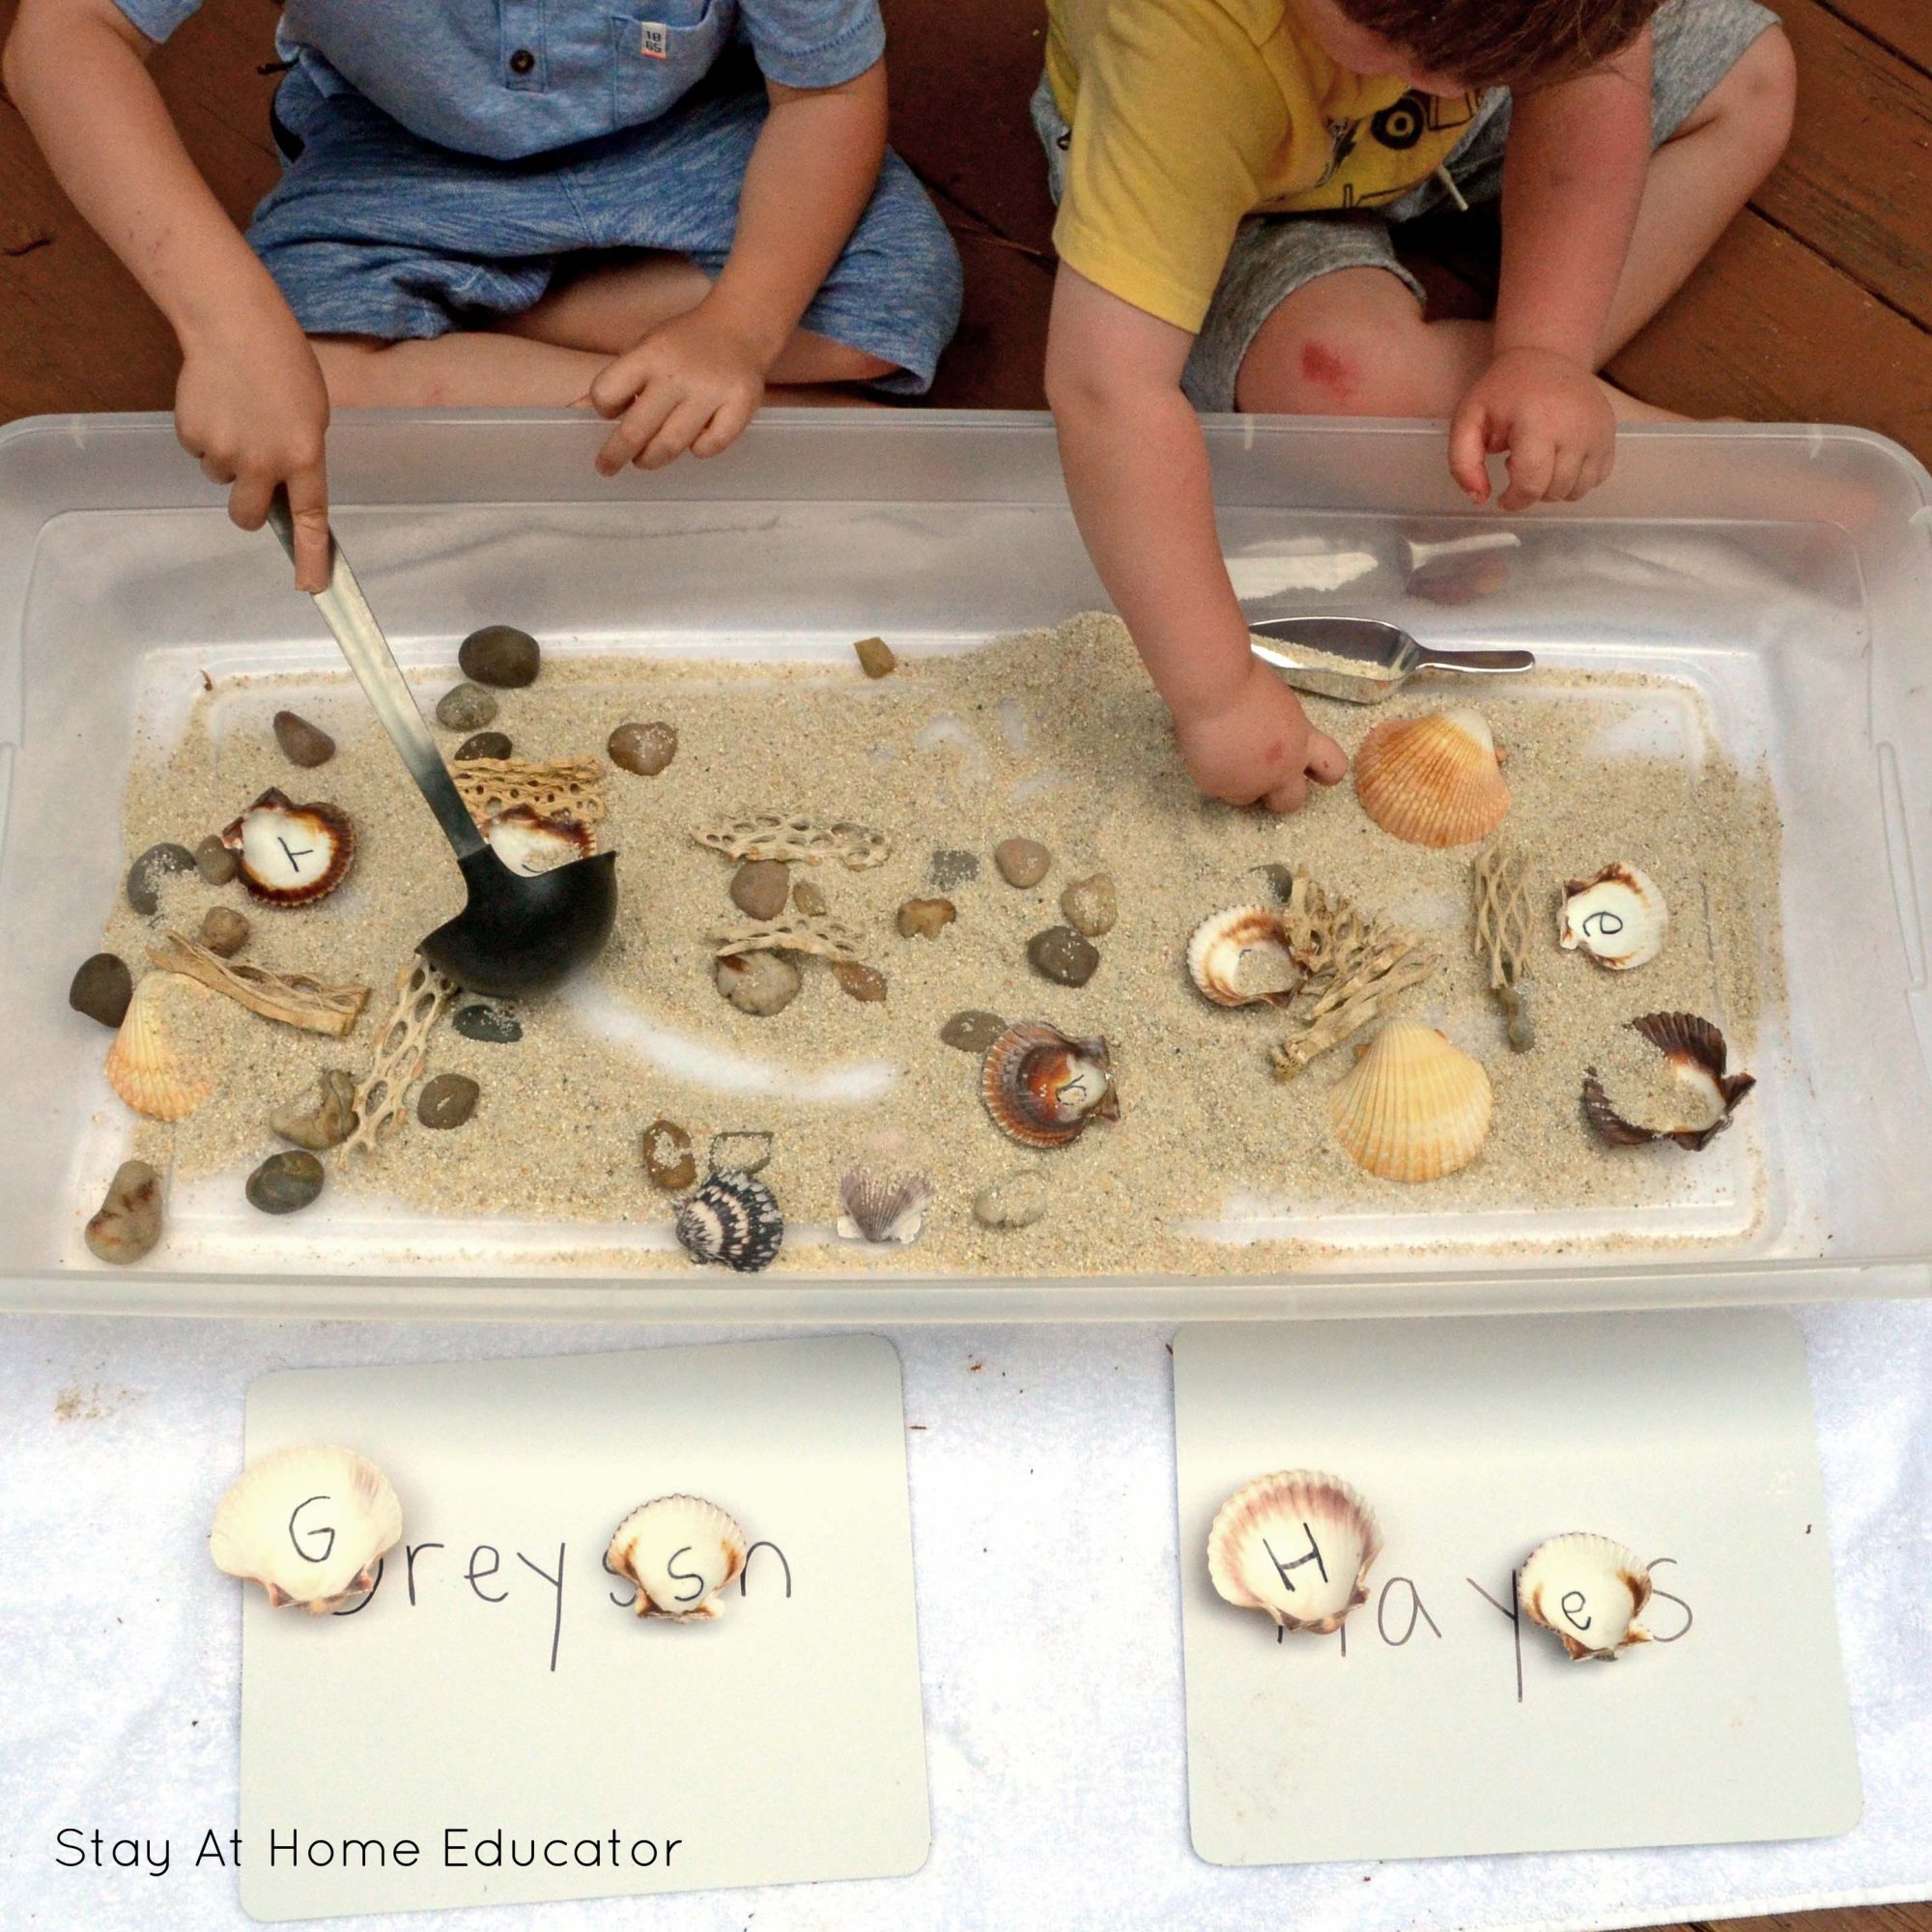 Sand has sensory play benefits and can also be very calming